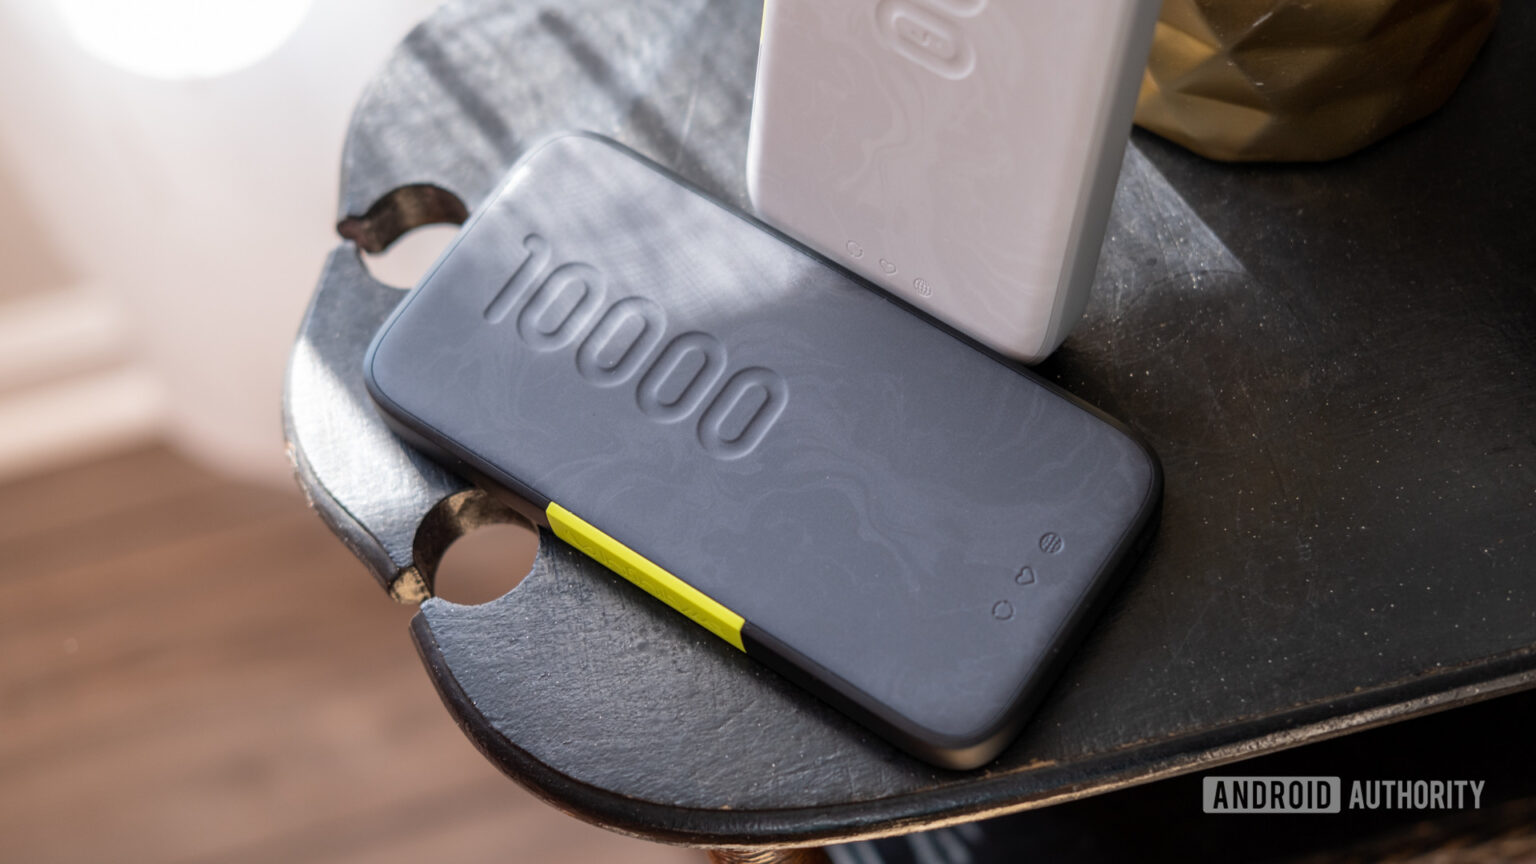 10,000mah power banks: What are your best options?